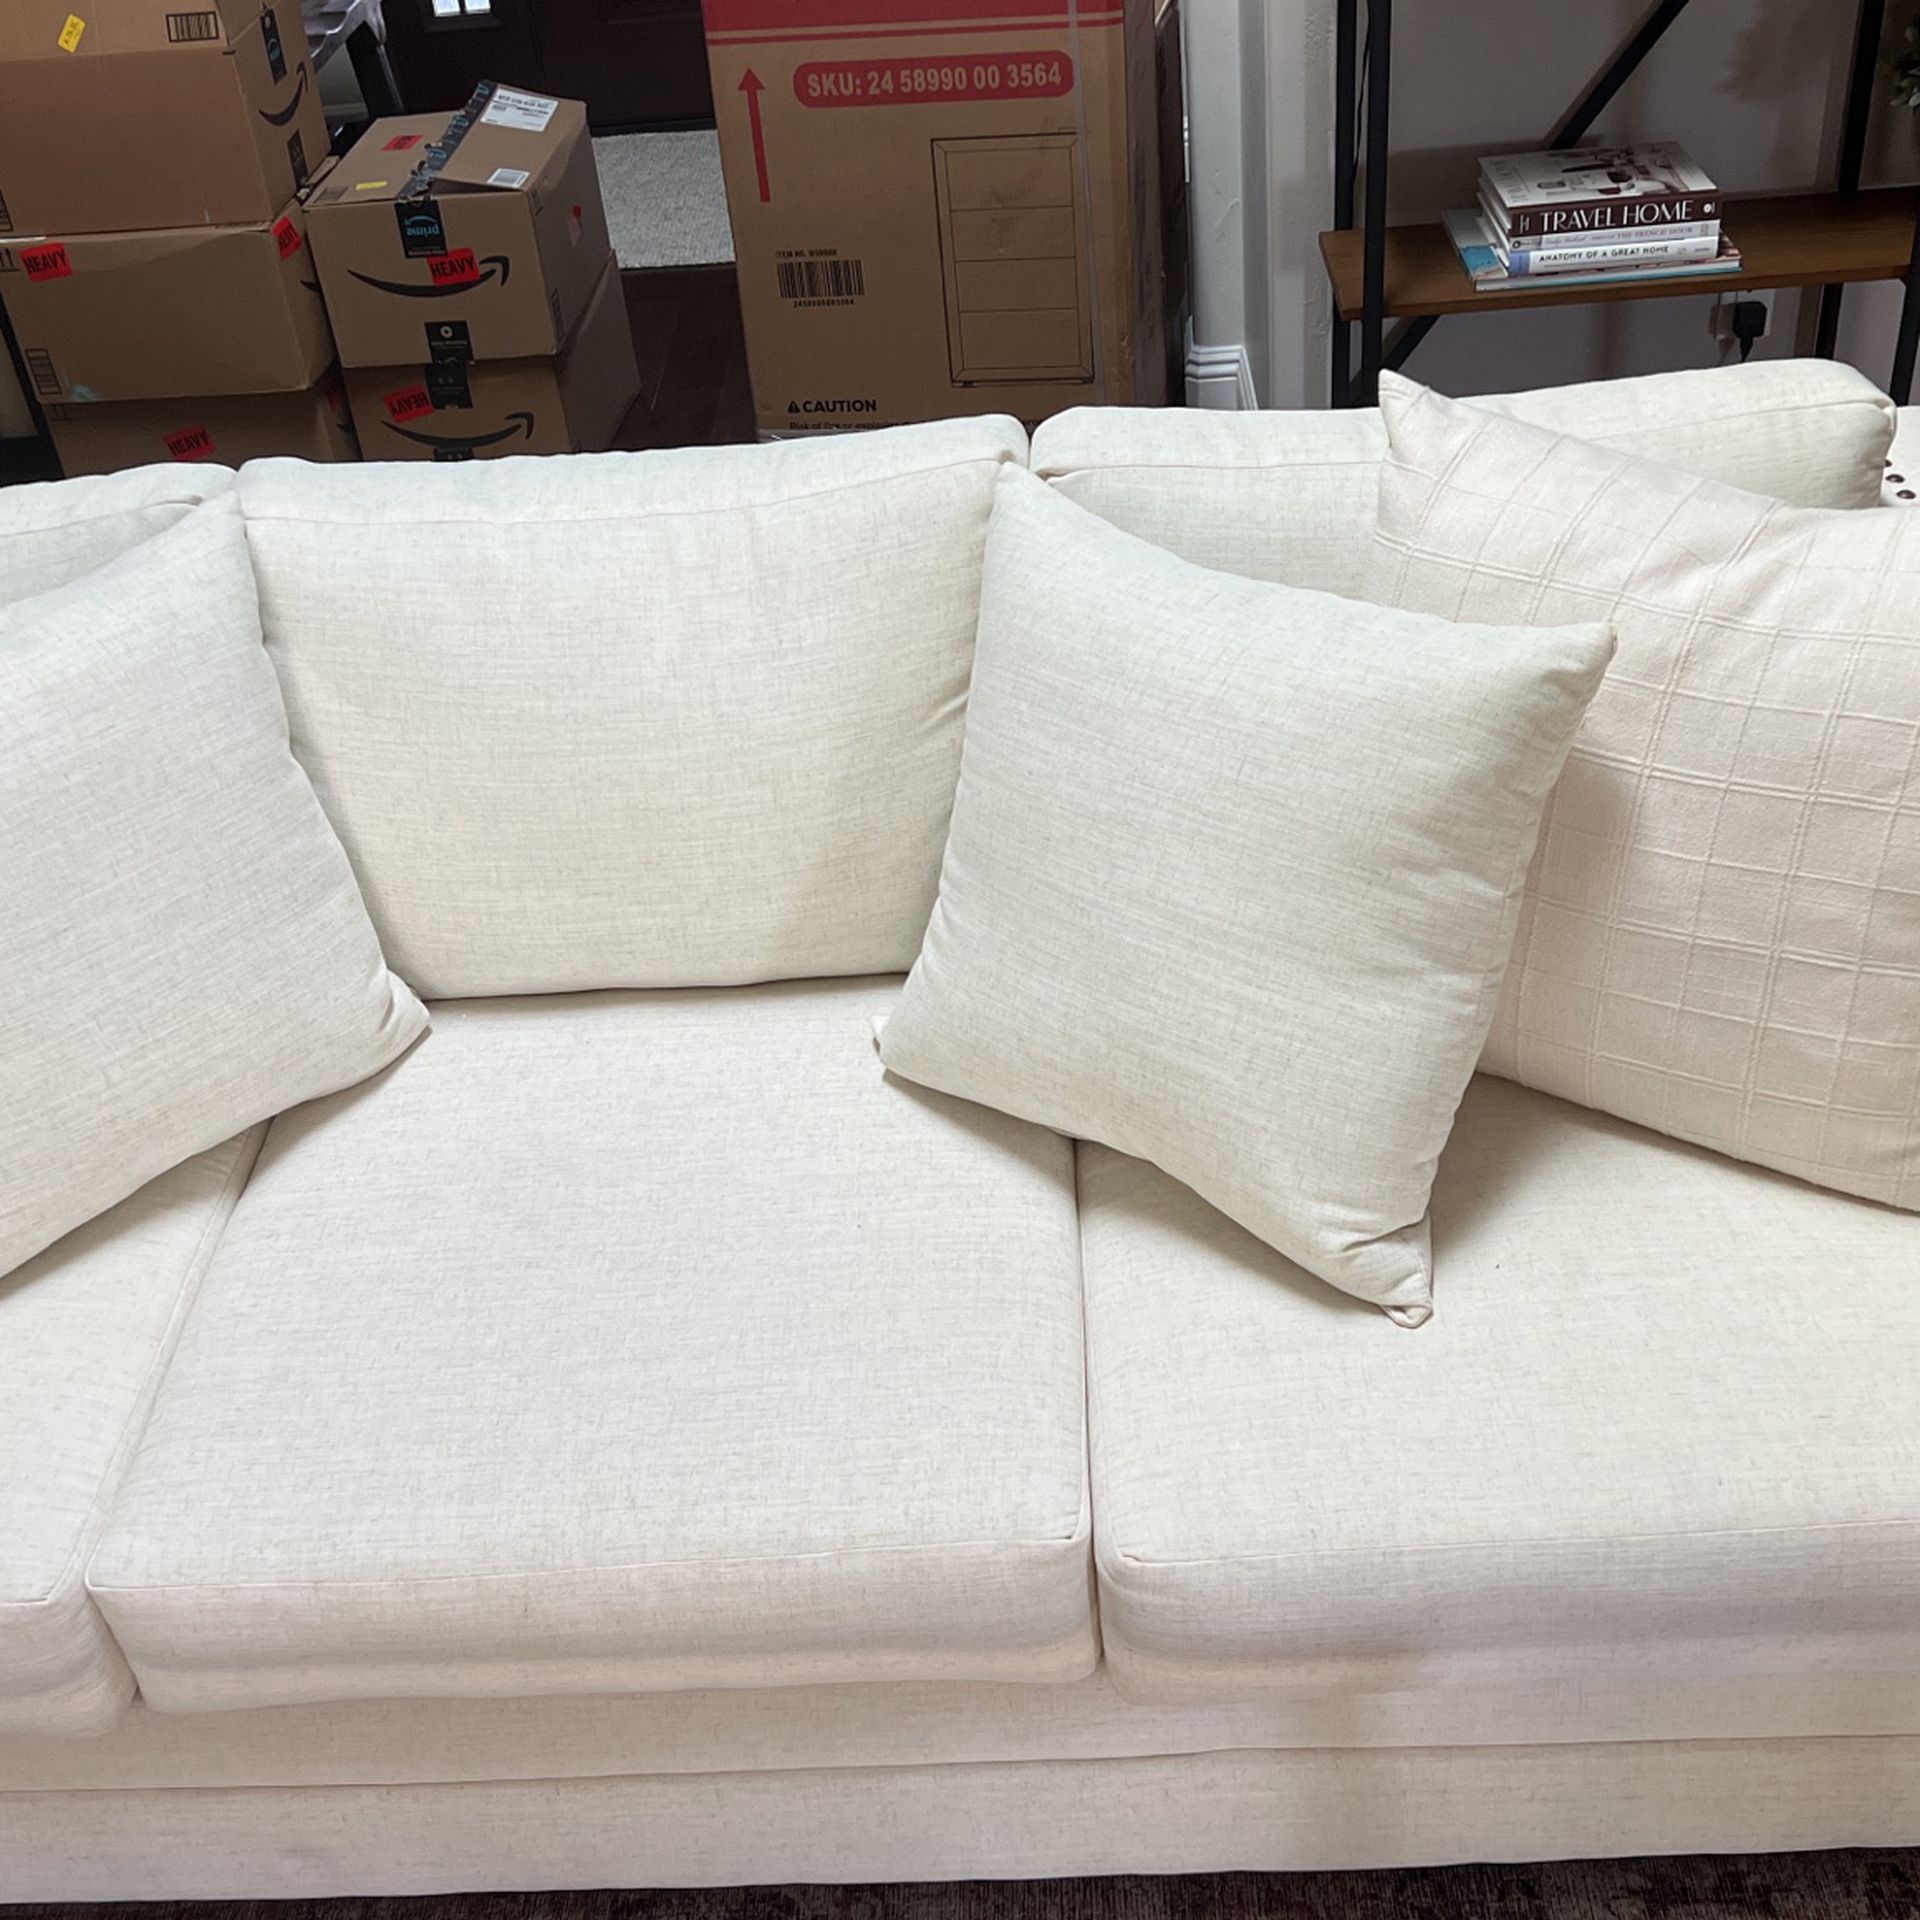 Excellent Condition Linen Sofa Set- Nailhead Trim W/ Accent Pillows from Mc Gee & Co. 